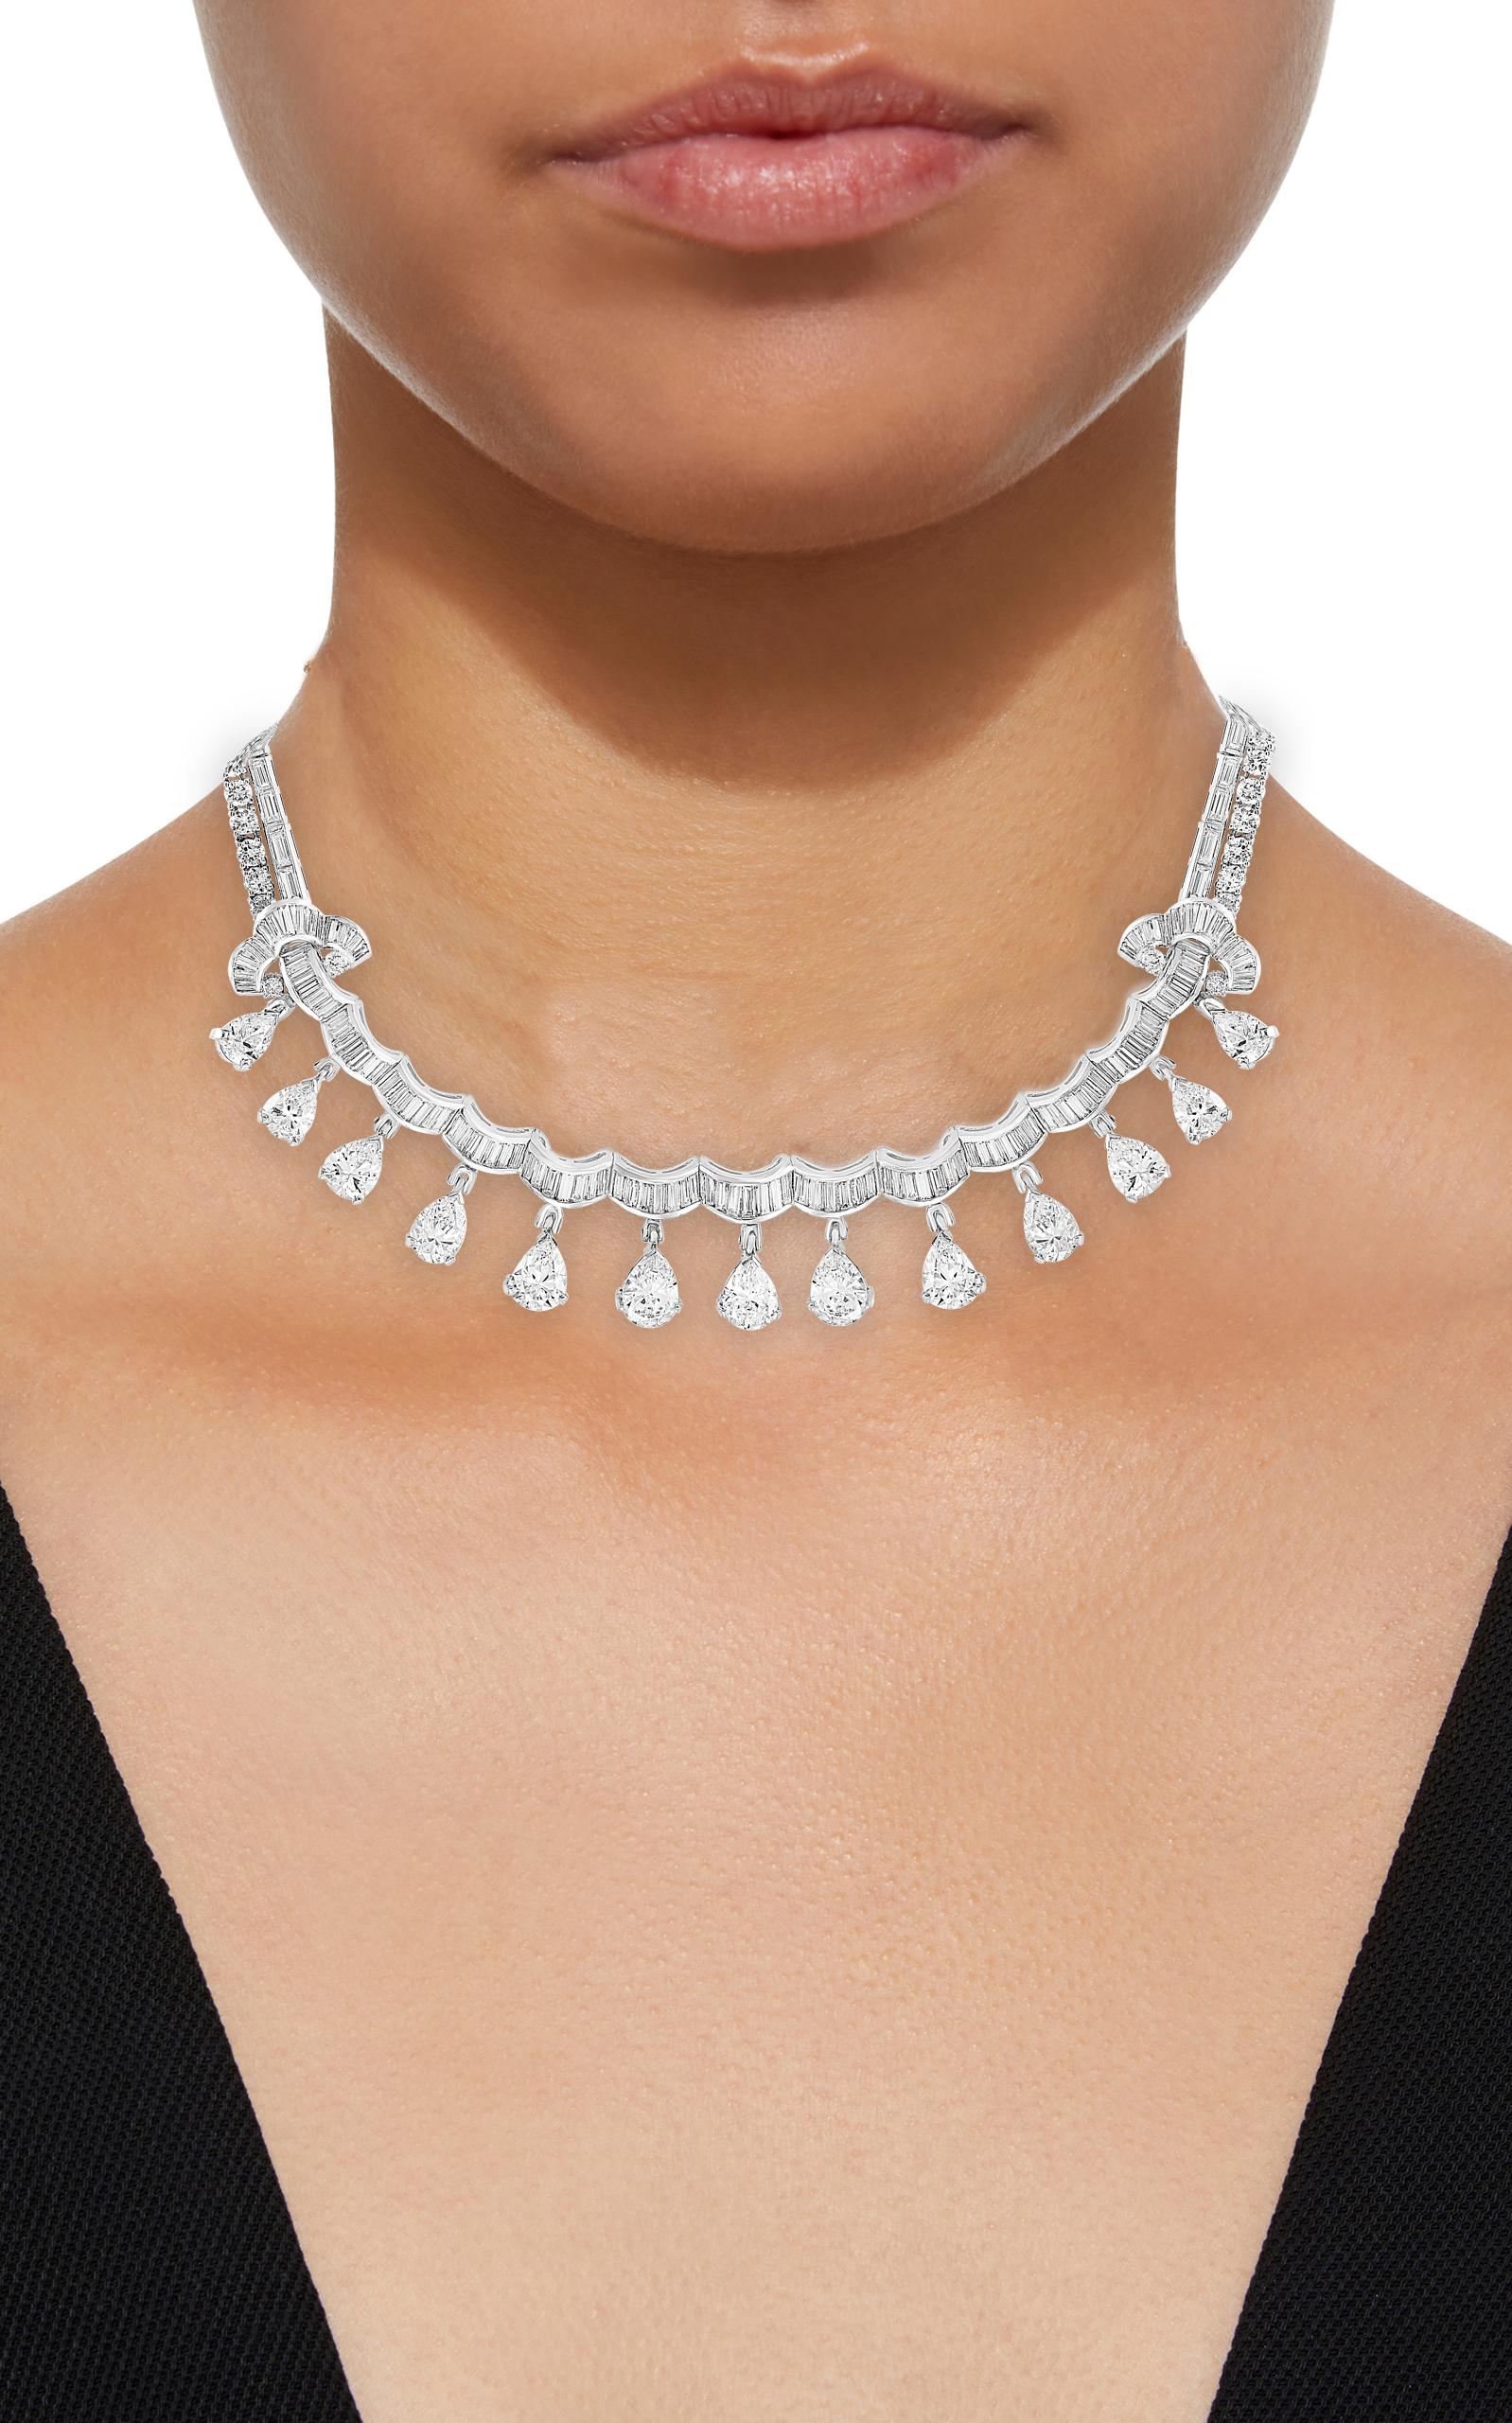 35 Carats VS, E Pear, Baguettes and Round cut Diamond Necklace in Platinum
A resplendent piece from the 1930's comprised of several magnificent brilliant-cut, pear-shaped and Baguettes diamonds weighing approximately 35 carats, elegantly crafted in